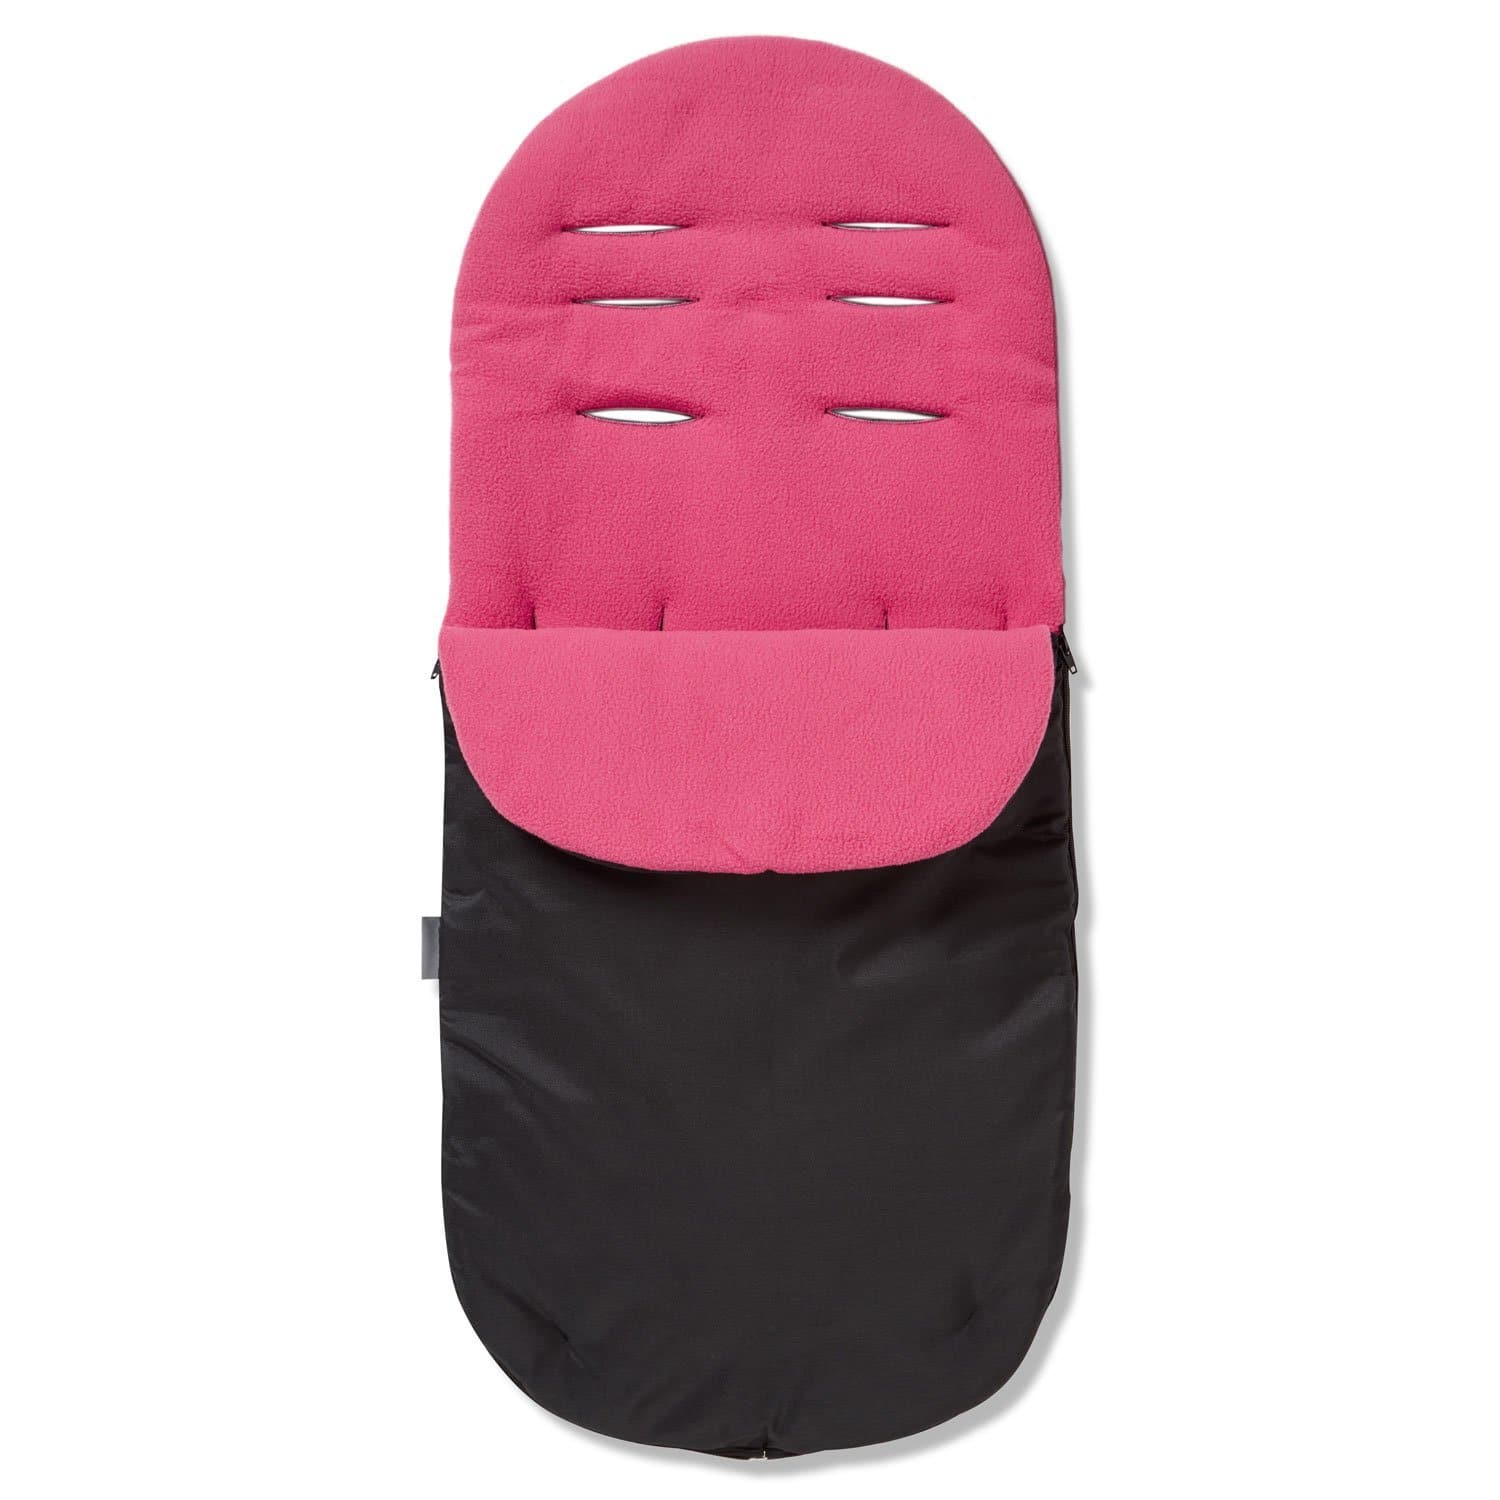 Footmuff / Cosy Toes Compatible with Mima - For Your Little One